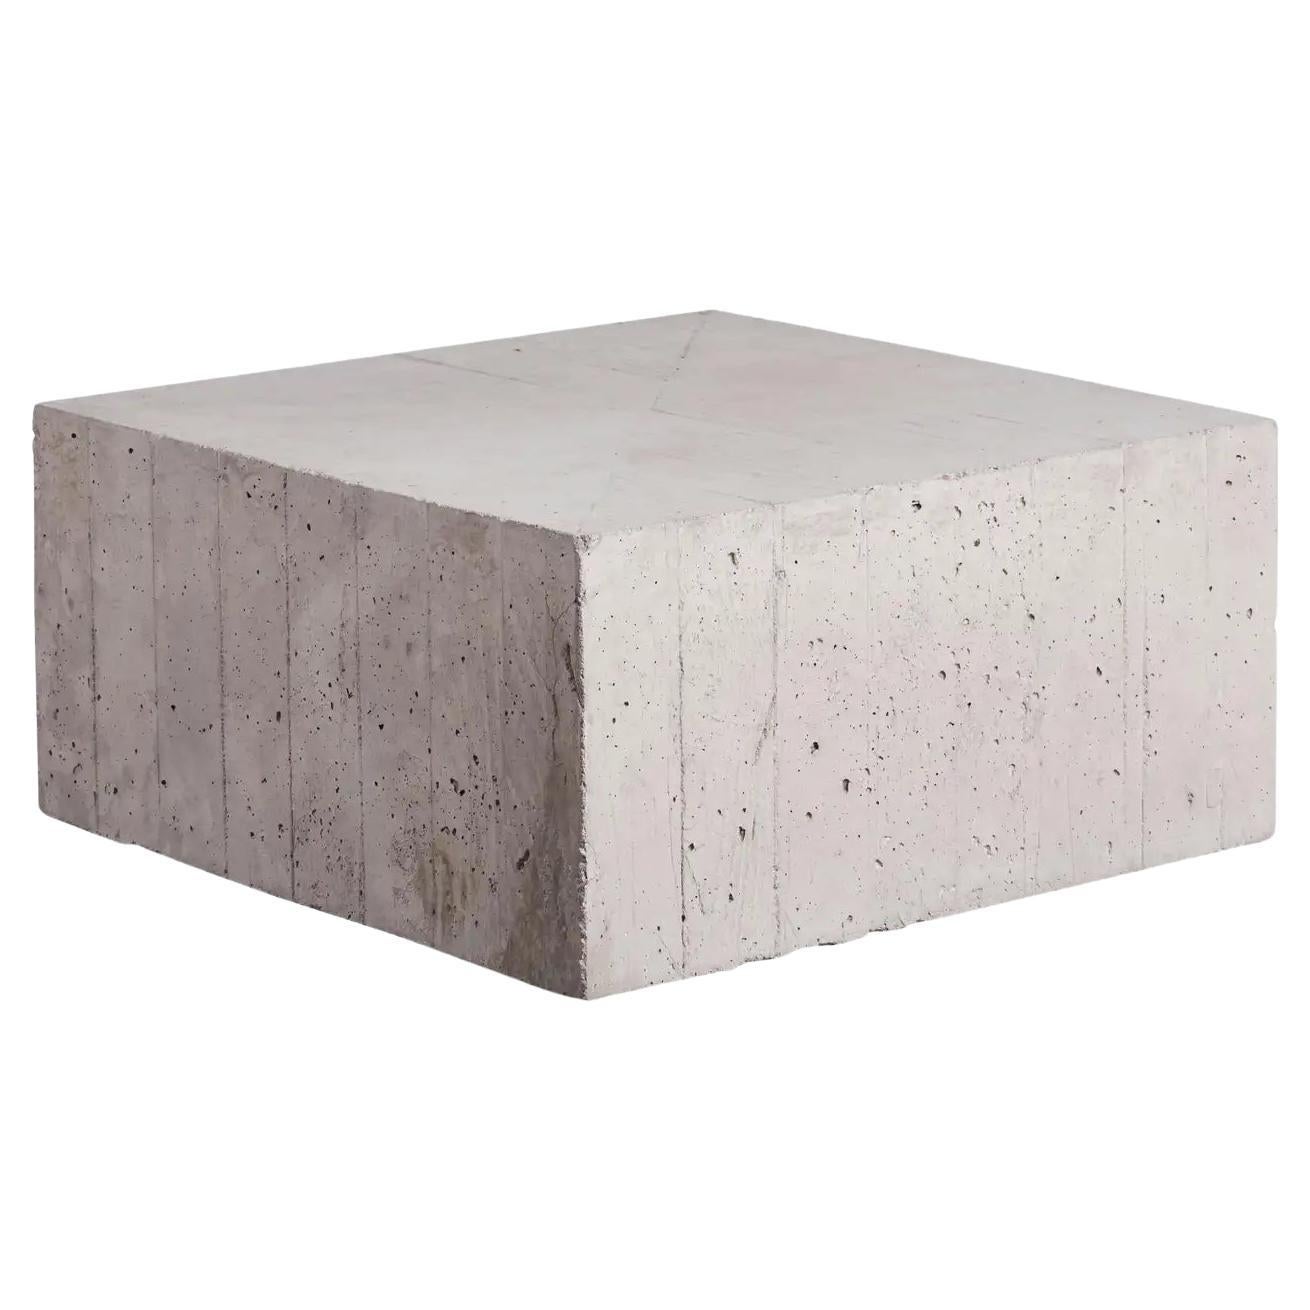 'Hashima' Reinforced Concrete Table, One of a Kind Artwork by Littlewhitehead For Sale